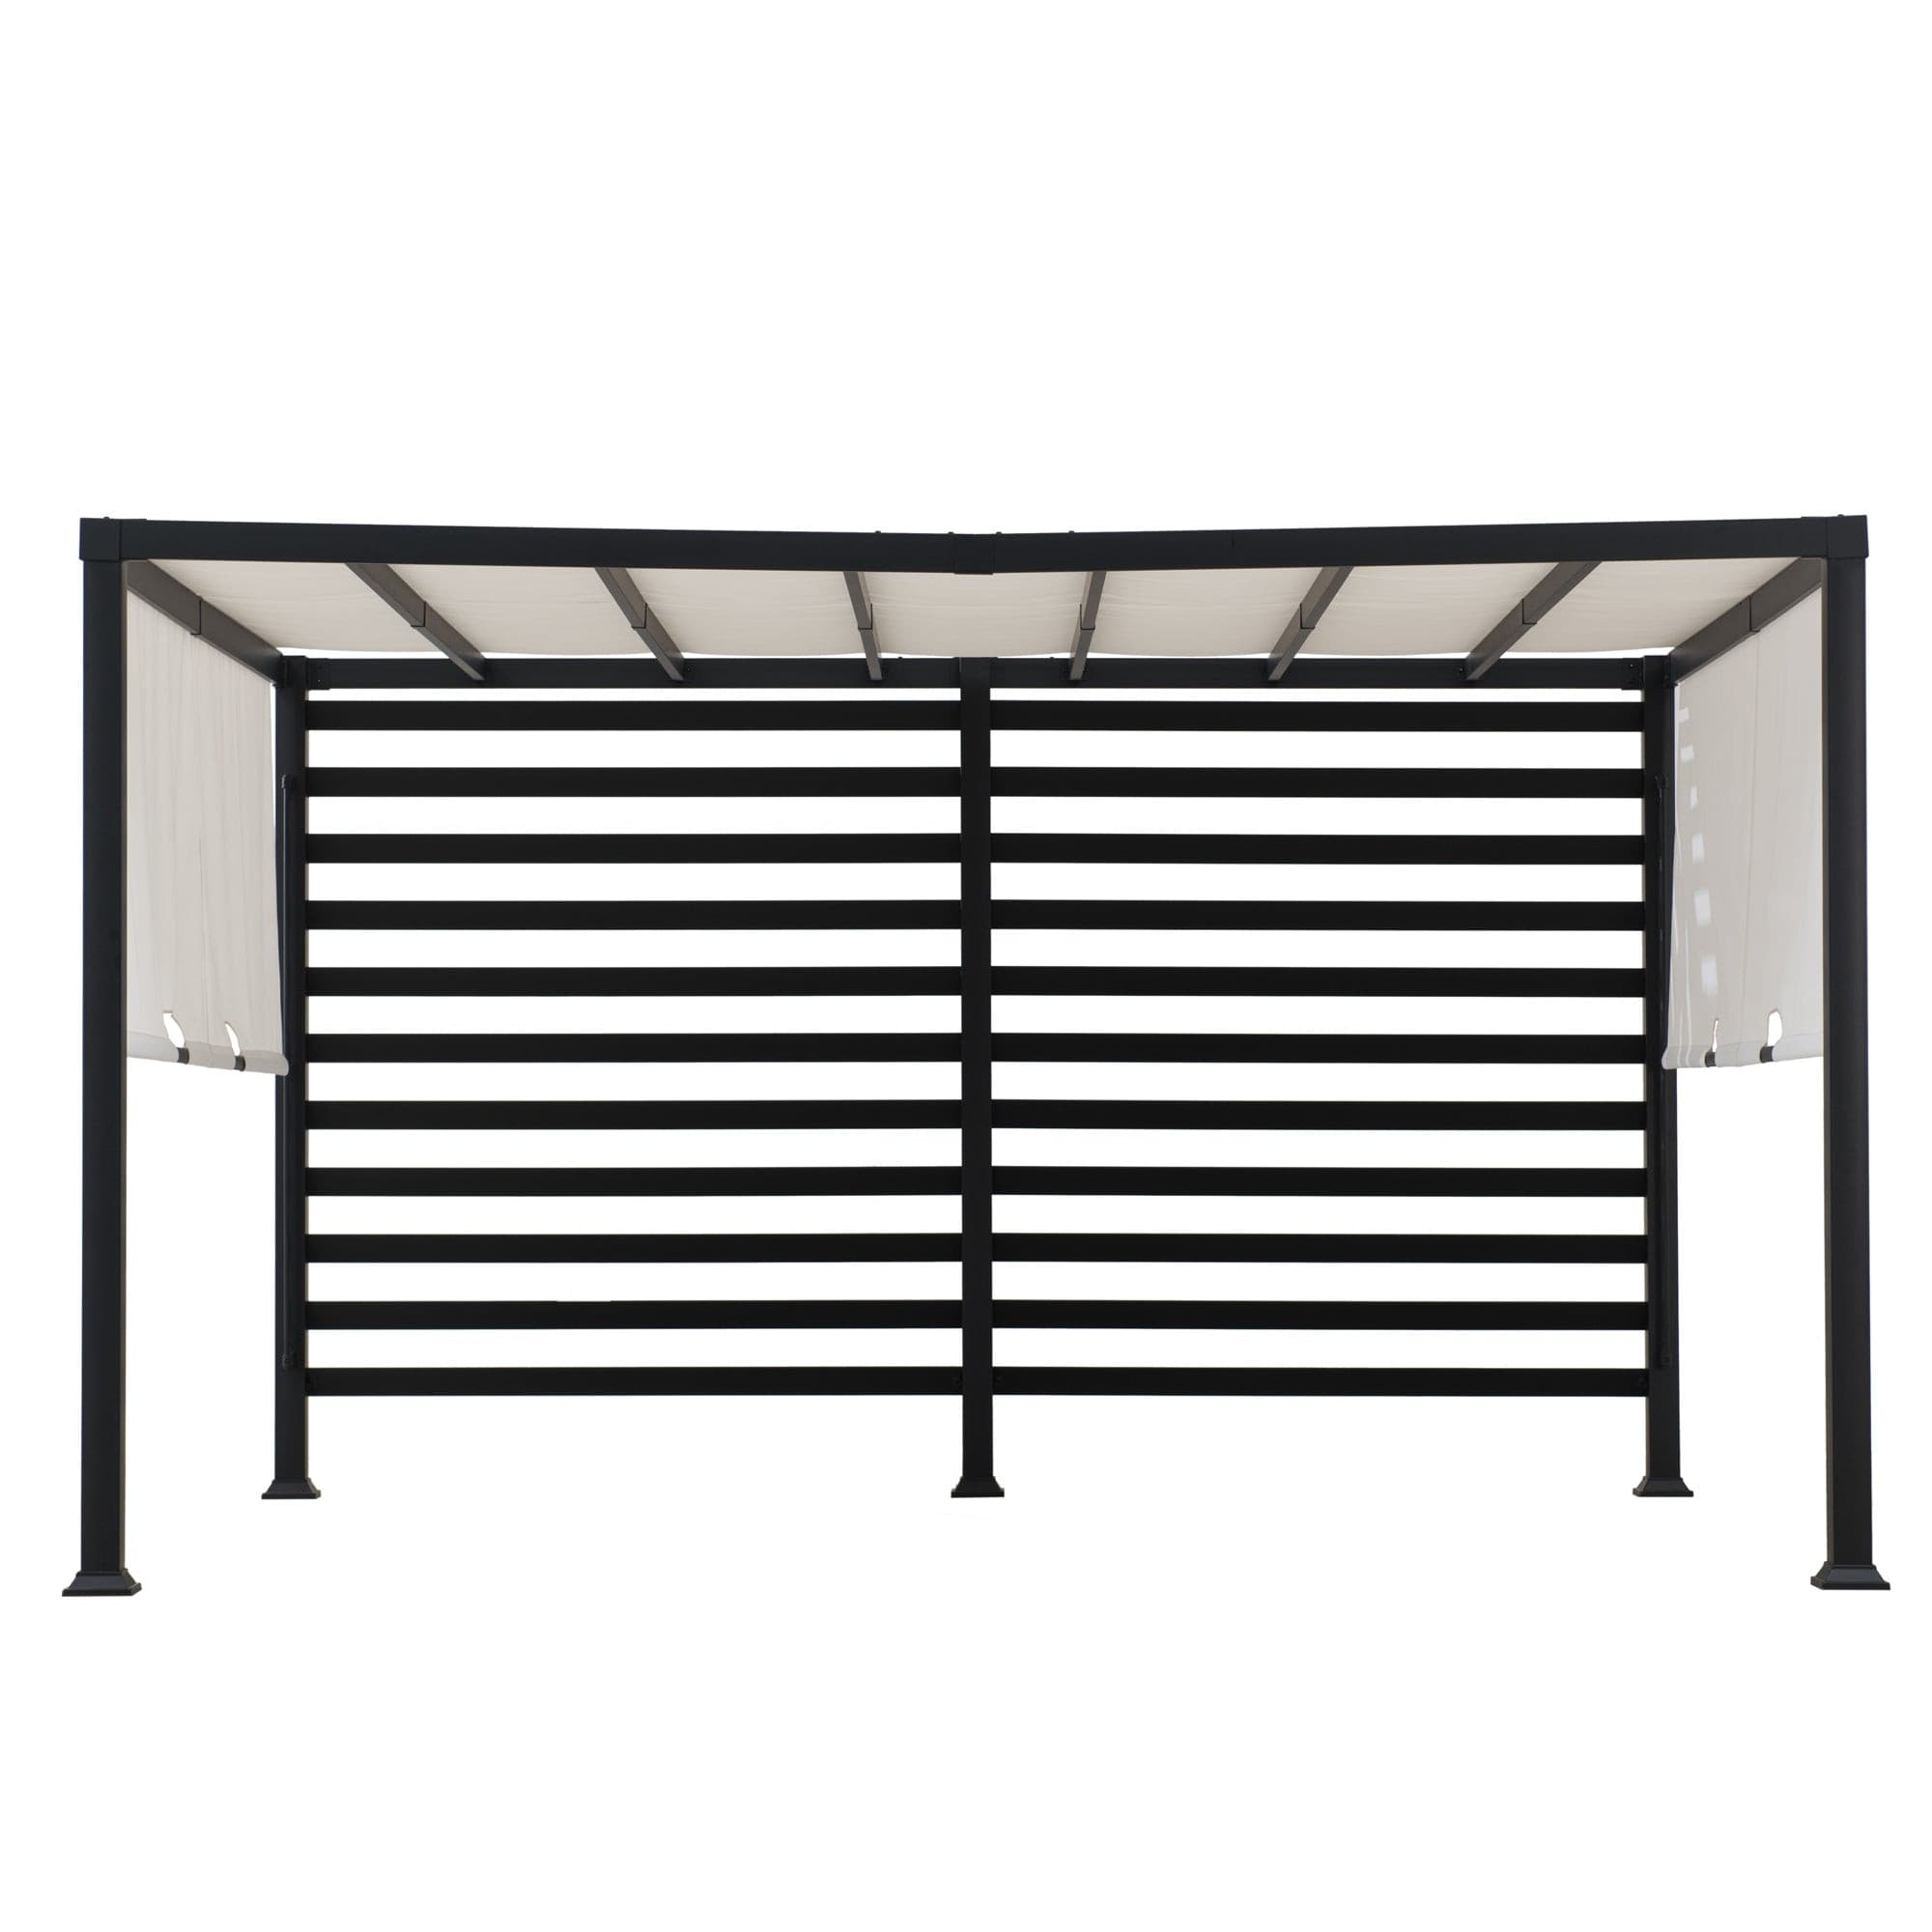 Sunjoy 12 ft. x 10 ft. White Steel Pergola with Adjustable Canopy